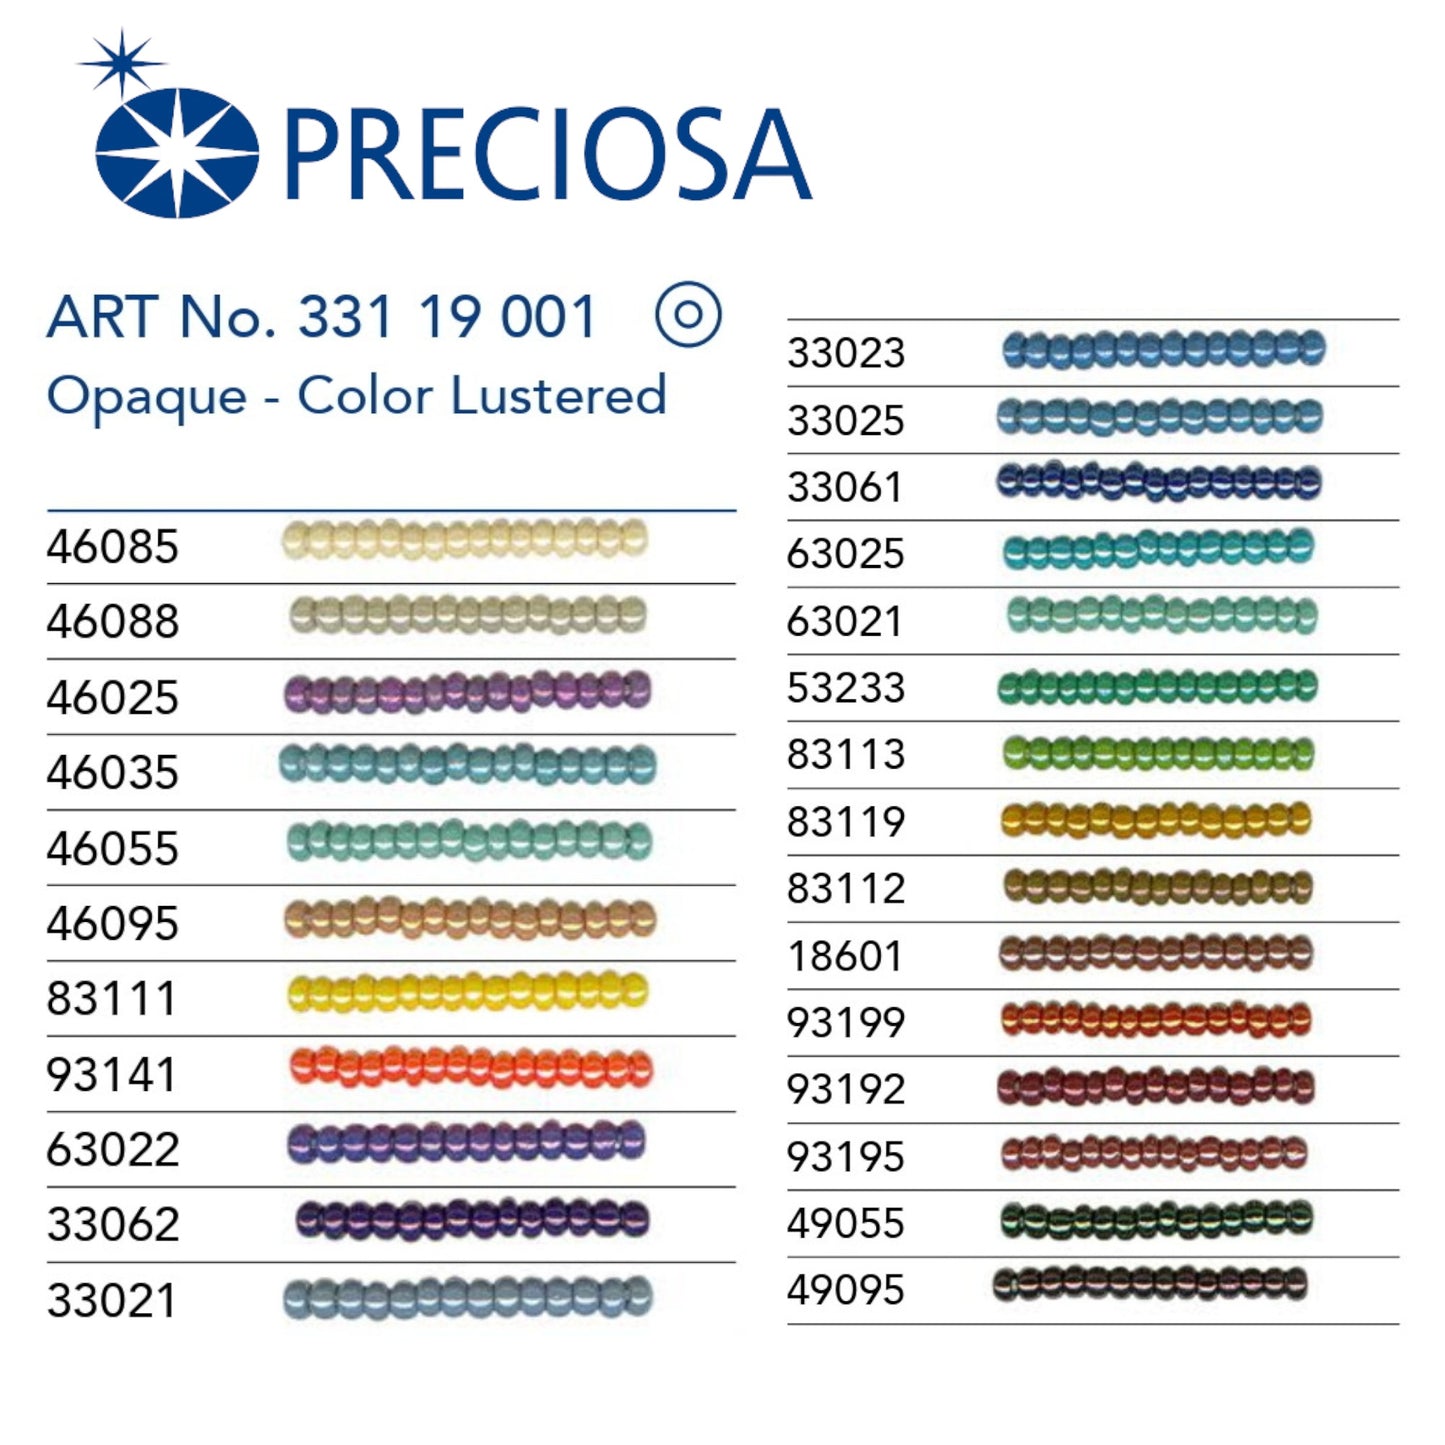 46055 Czech Seed Beads Preciosa Rocailes Opaque - Color Lustered - VadymShop